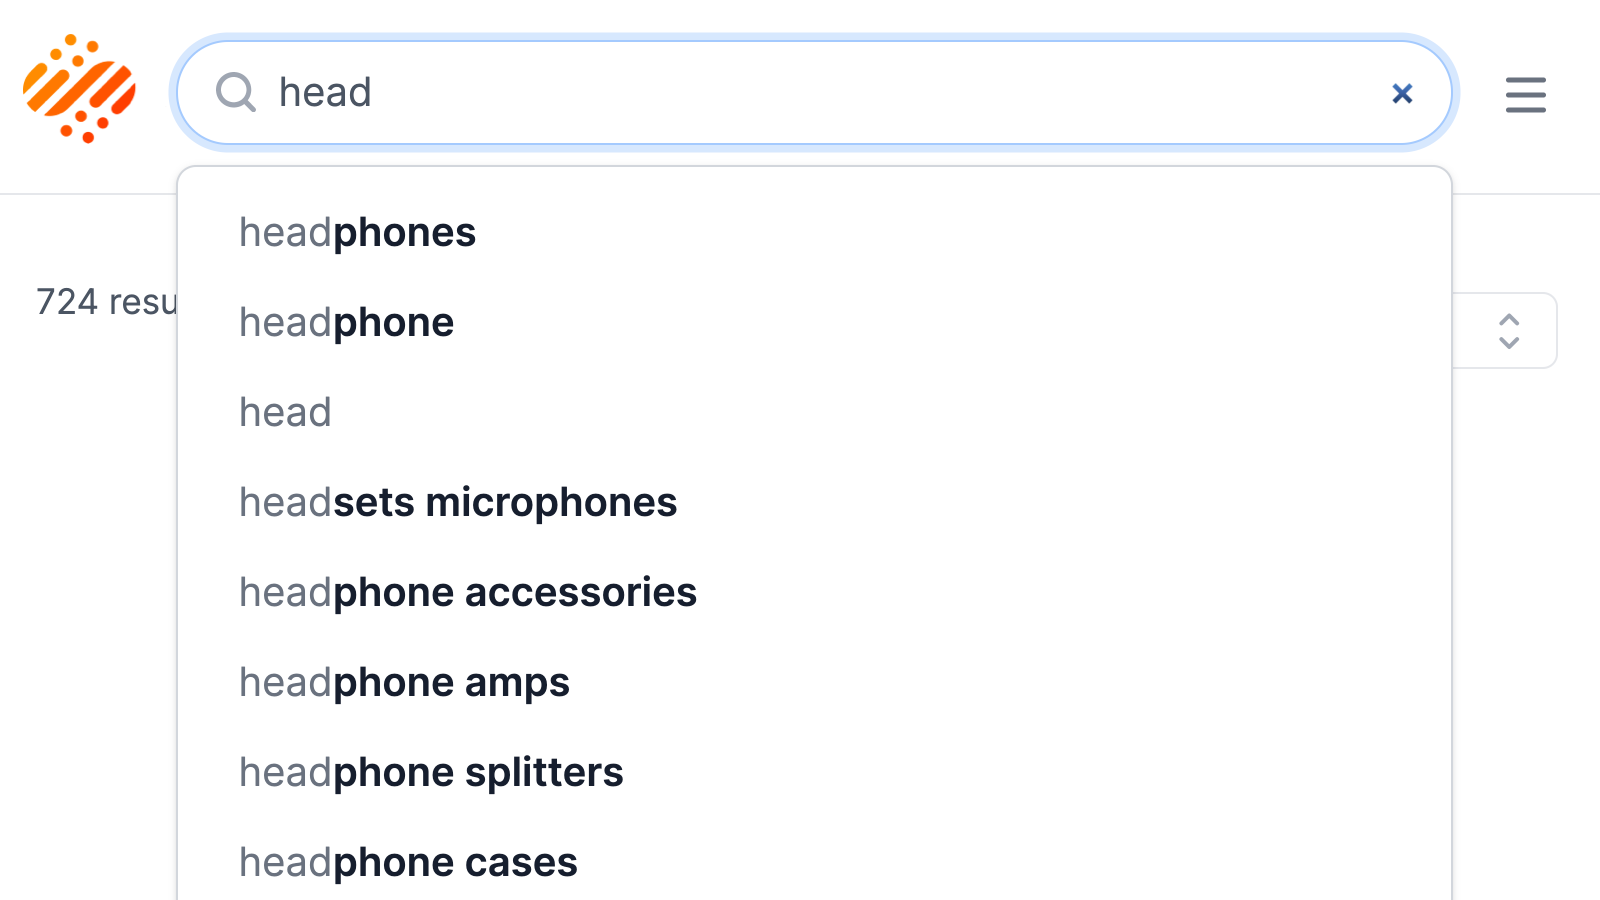 Auto-complete & spell correction for product search results